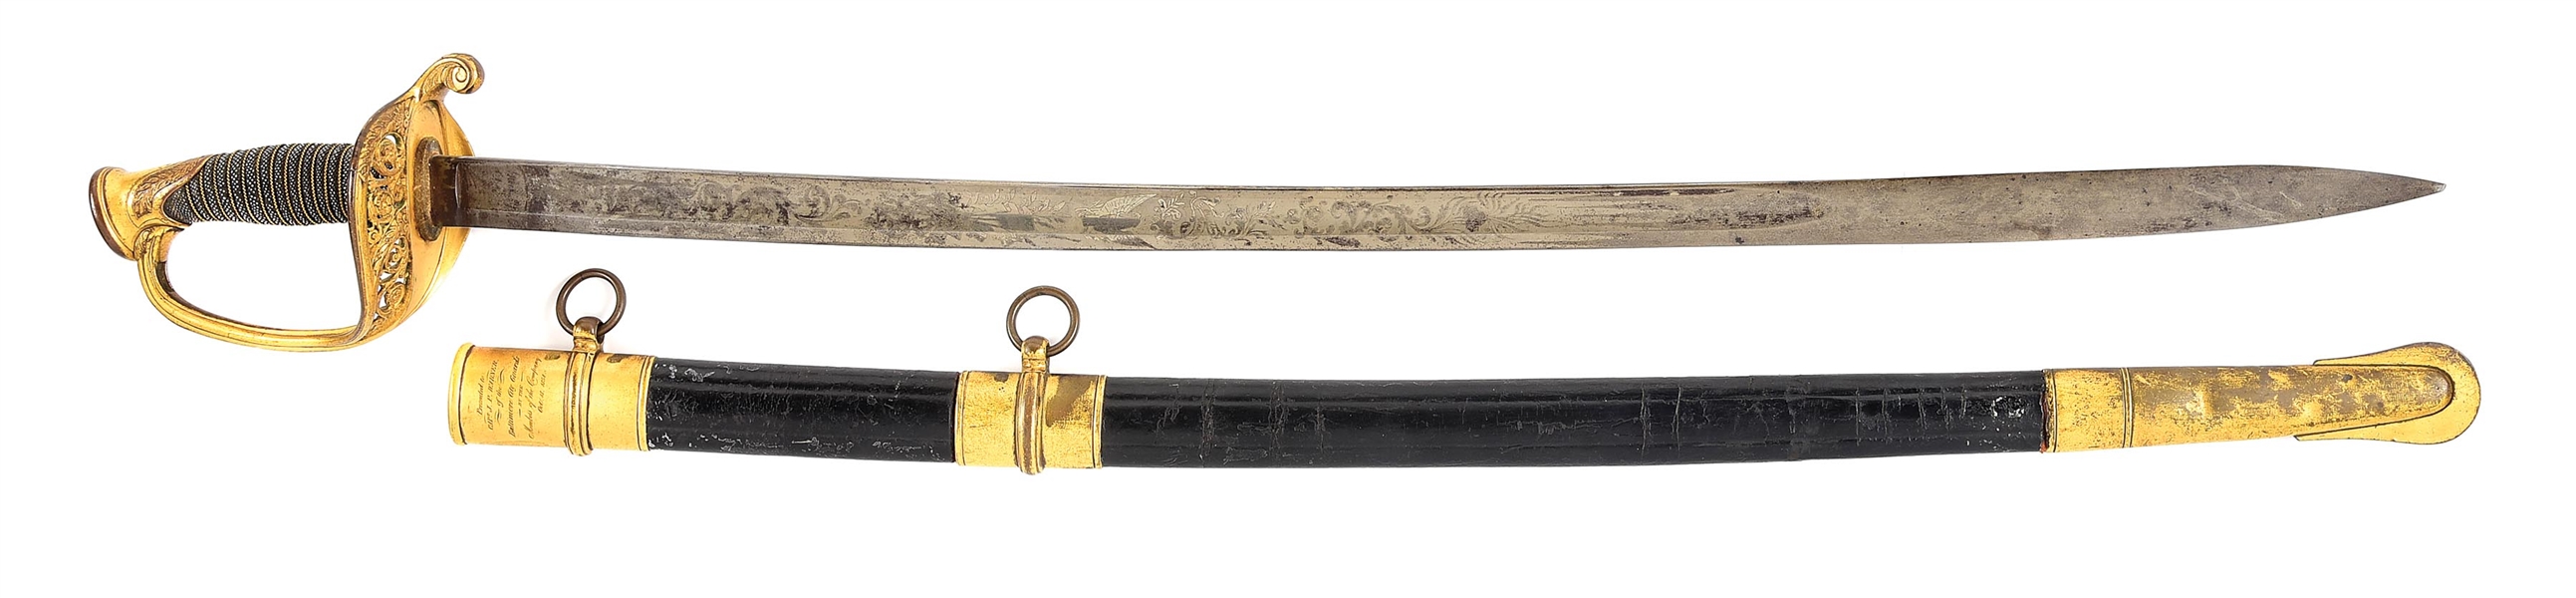 AMES PRESENTATION GRADE M1850 SWORD OF CAPTAIN JOSEPH P. WARNER, COMMANDER OF THE BALTIMORE CITY GUARD AGAINST JOHN BROWN AT HARPERS FERRY, UNION OFFICER IN THE CIVIL WAR.